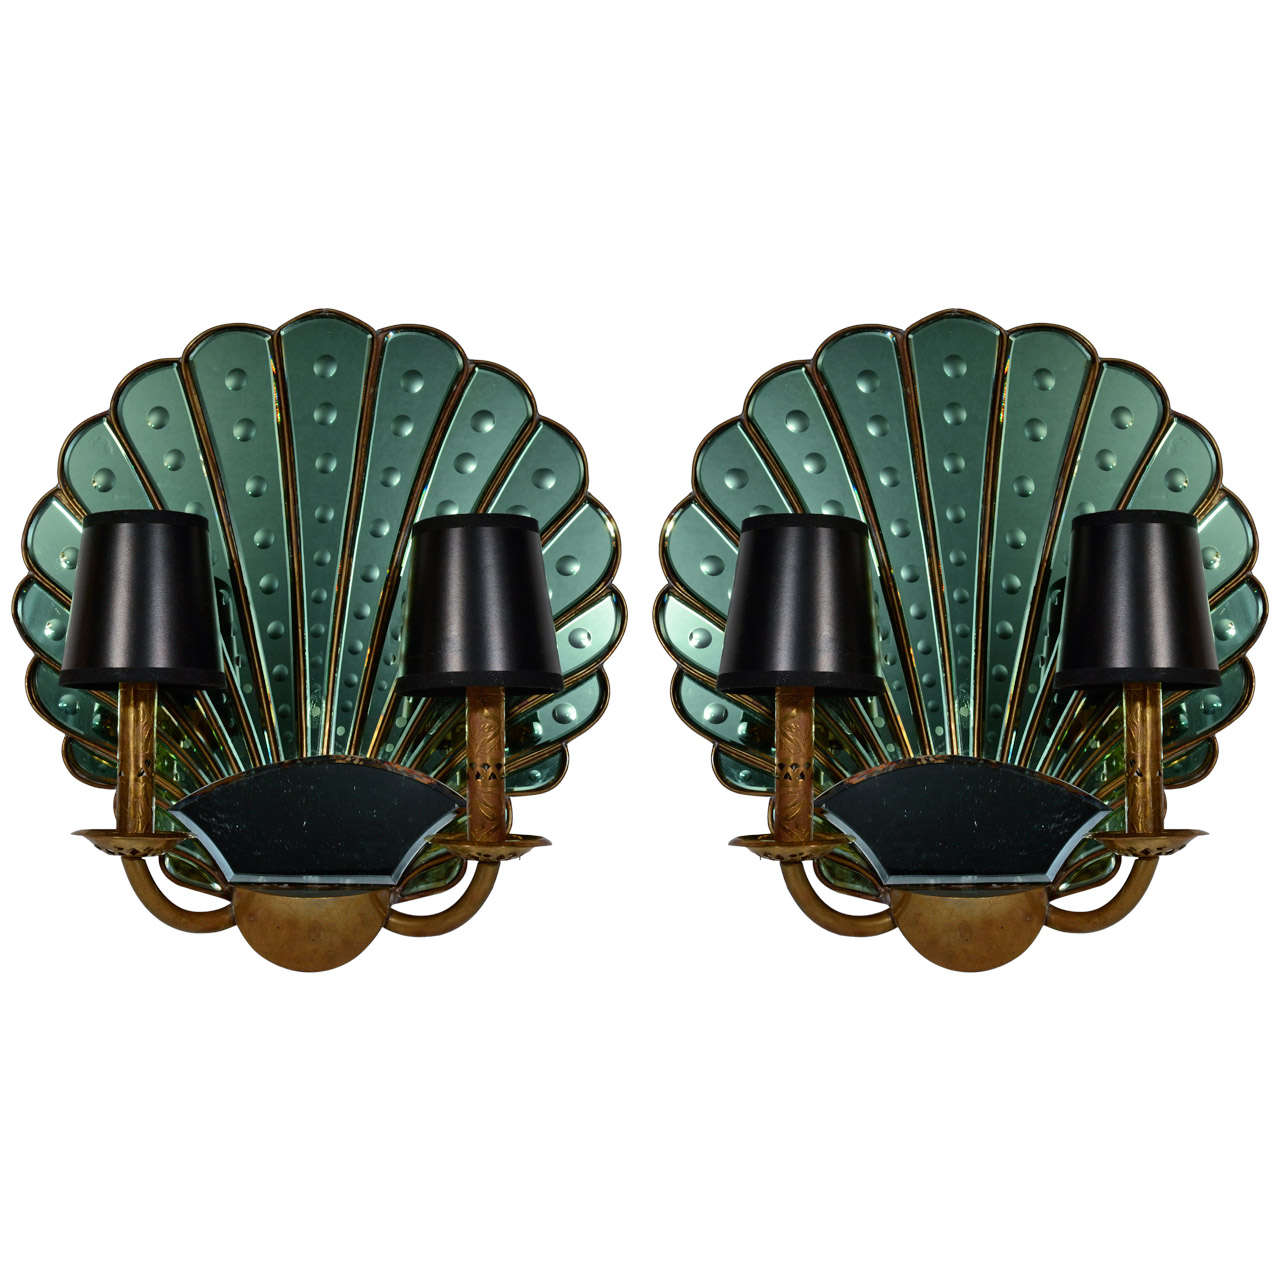 Pair of Art Deco Emerald Mirrored Sconces with Shell Design